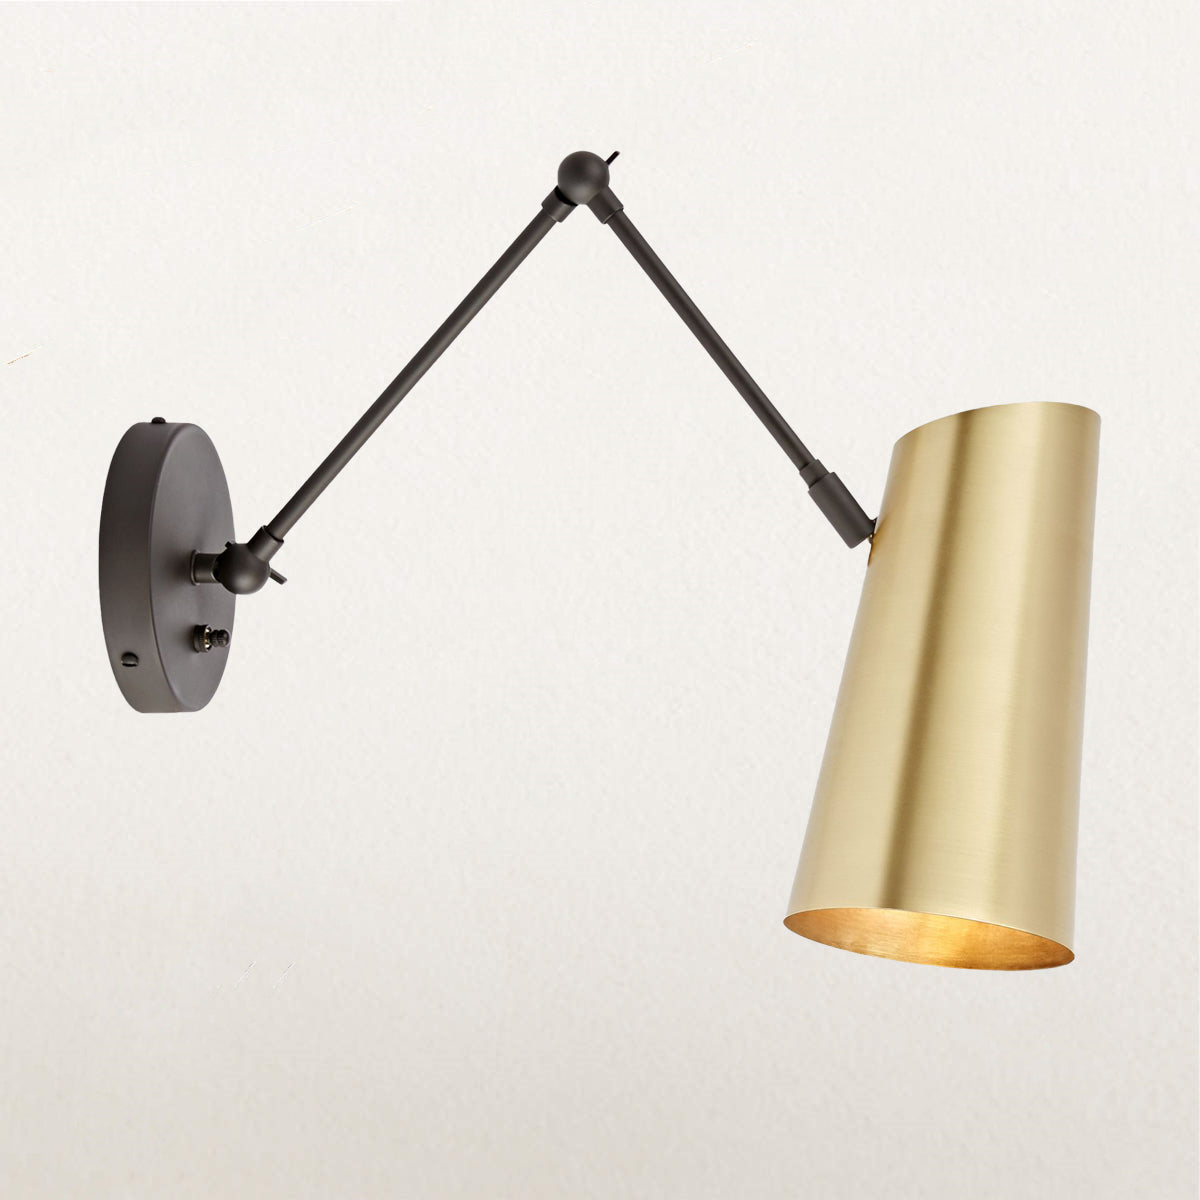 Elegant Articulating Mid-Century Modern Metal Sconce - Stylish and Functional Wall Lights for Living Room